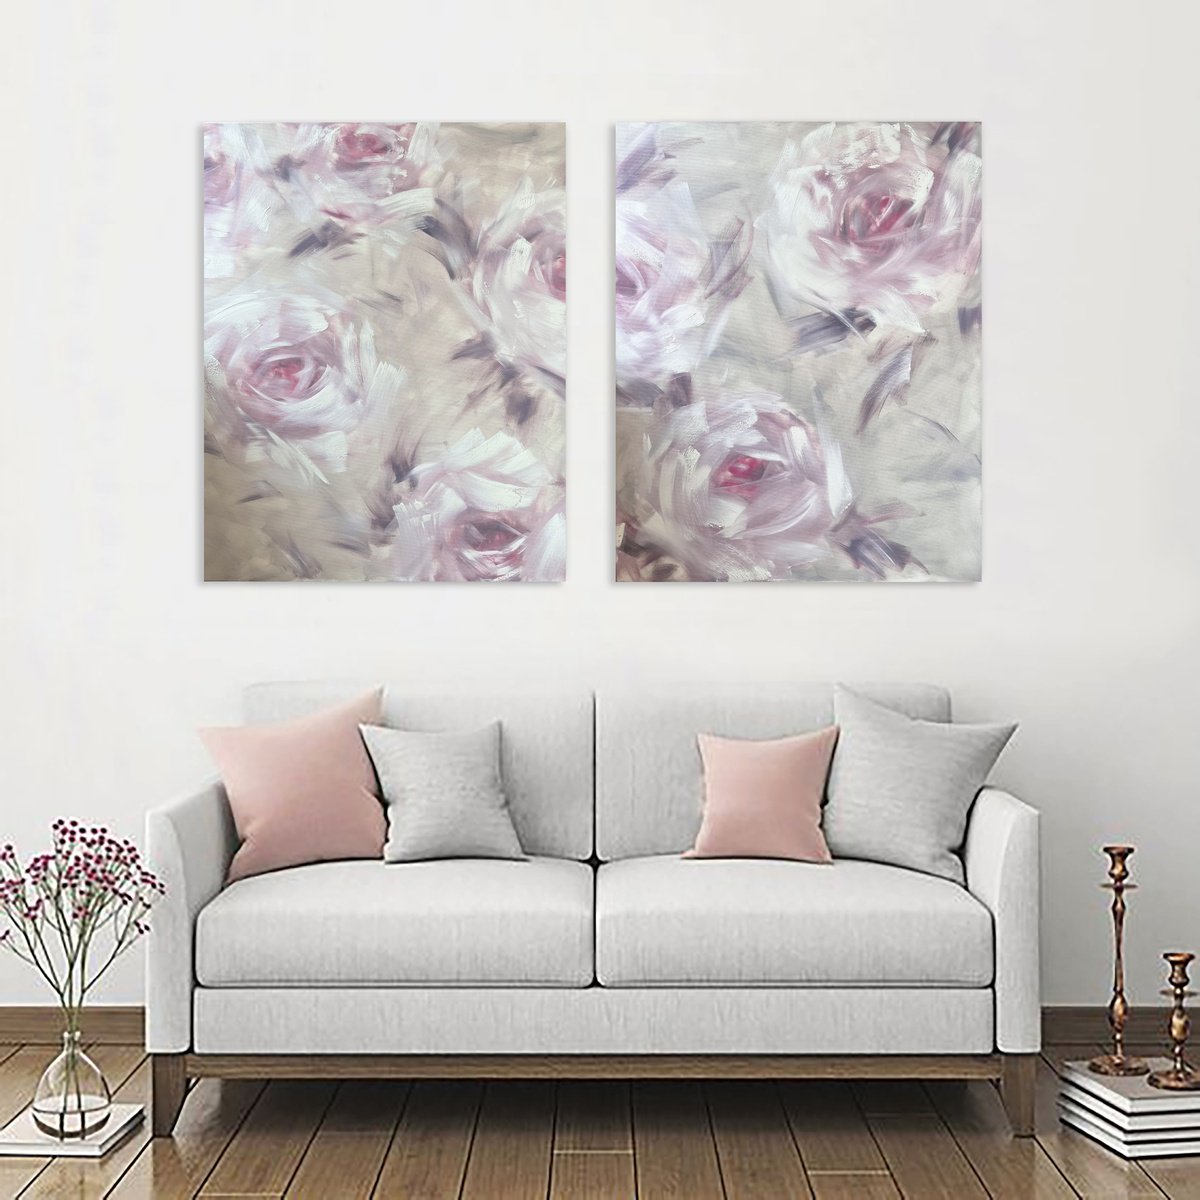 100x160cm / abstract flowers painting / Silence 2 set by Marina Skromova